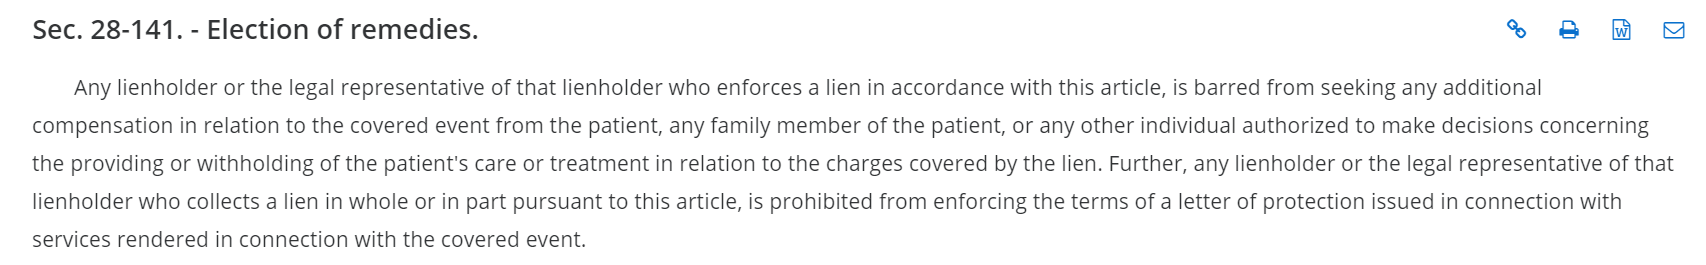 election of remedies provision from Hillsborough County hospital lien ordinance